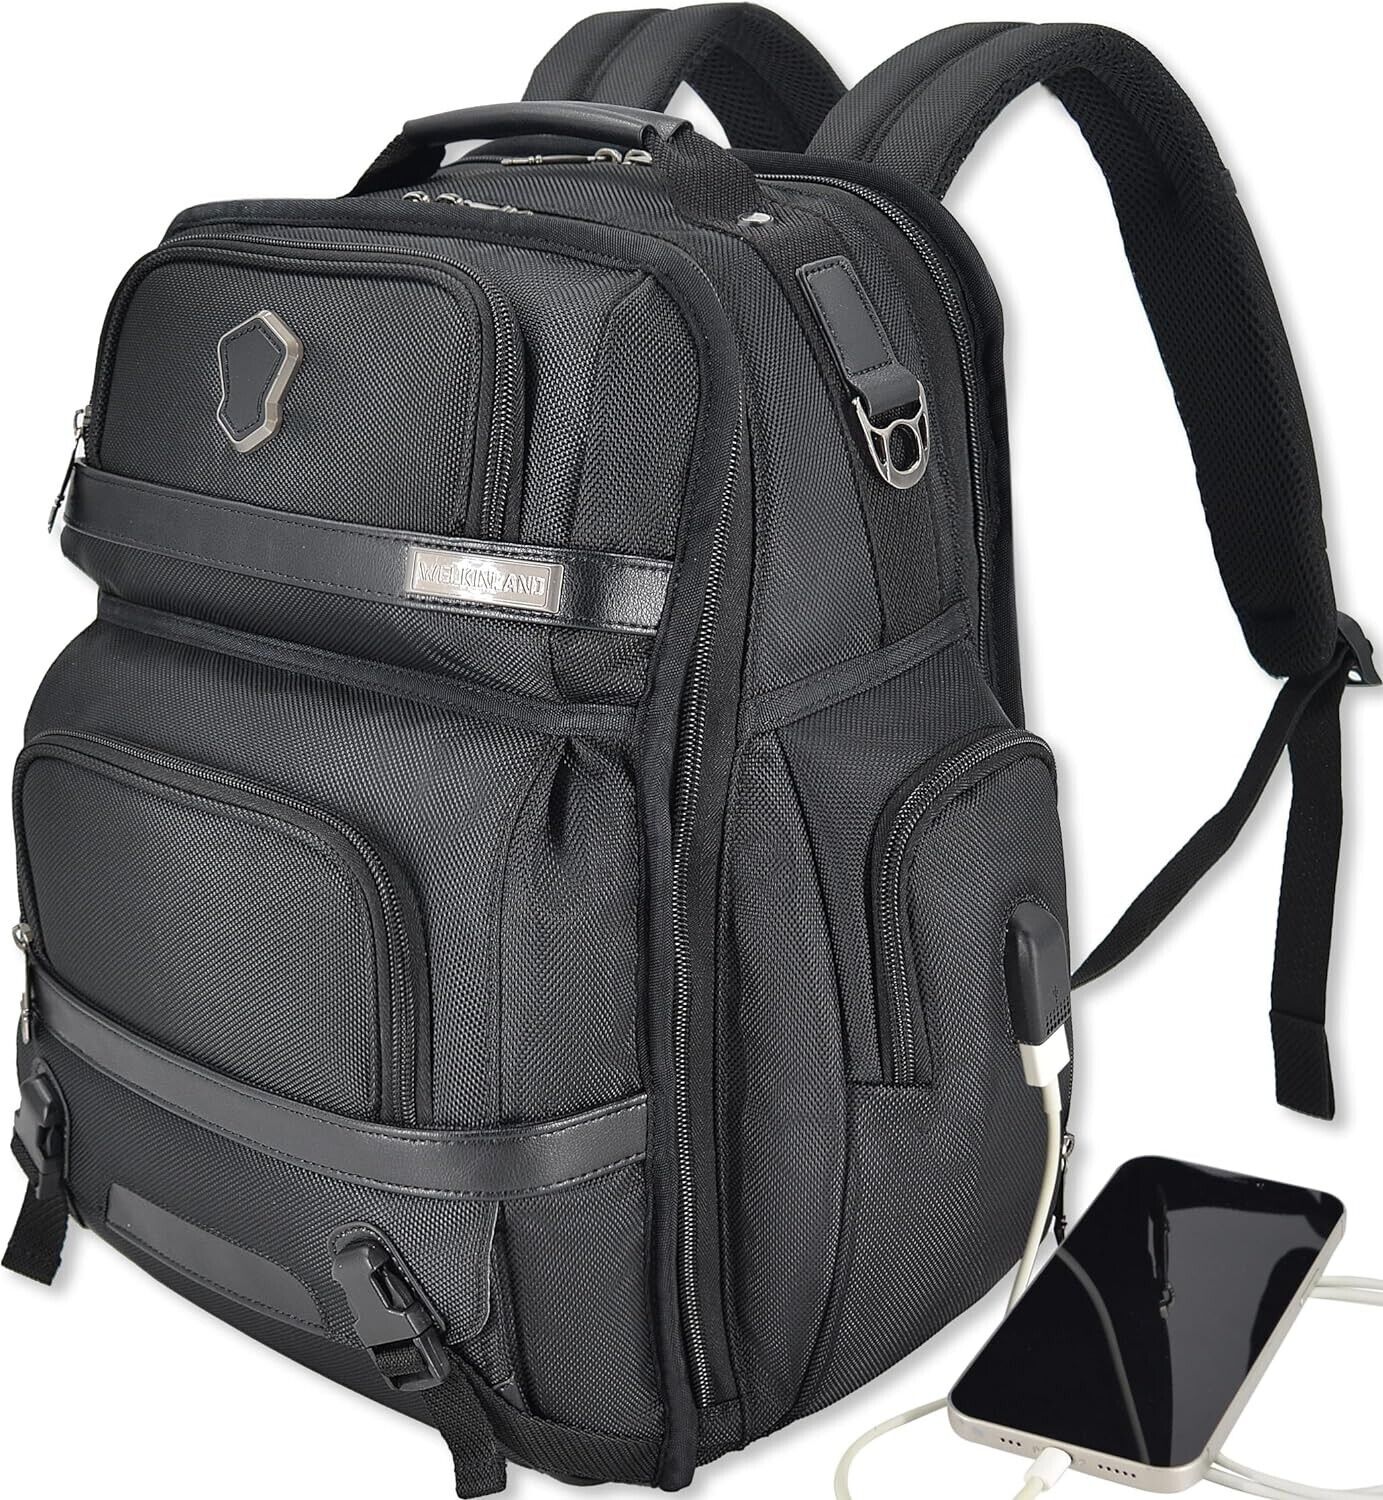 WELKINLAND | Business backpack, Professional mens leather business backpack